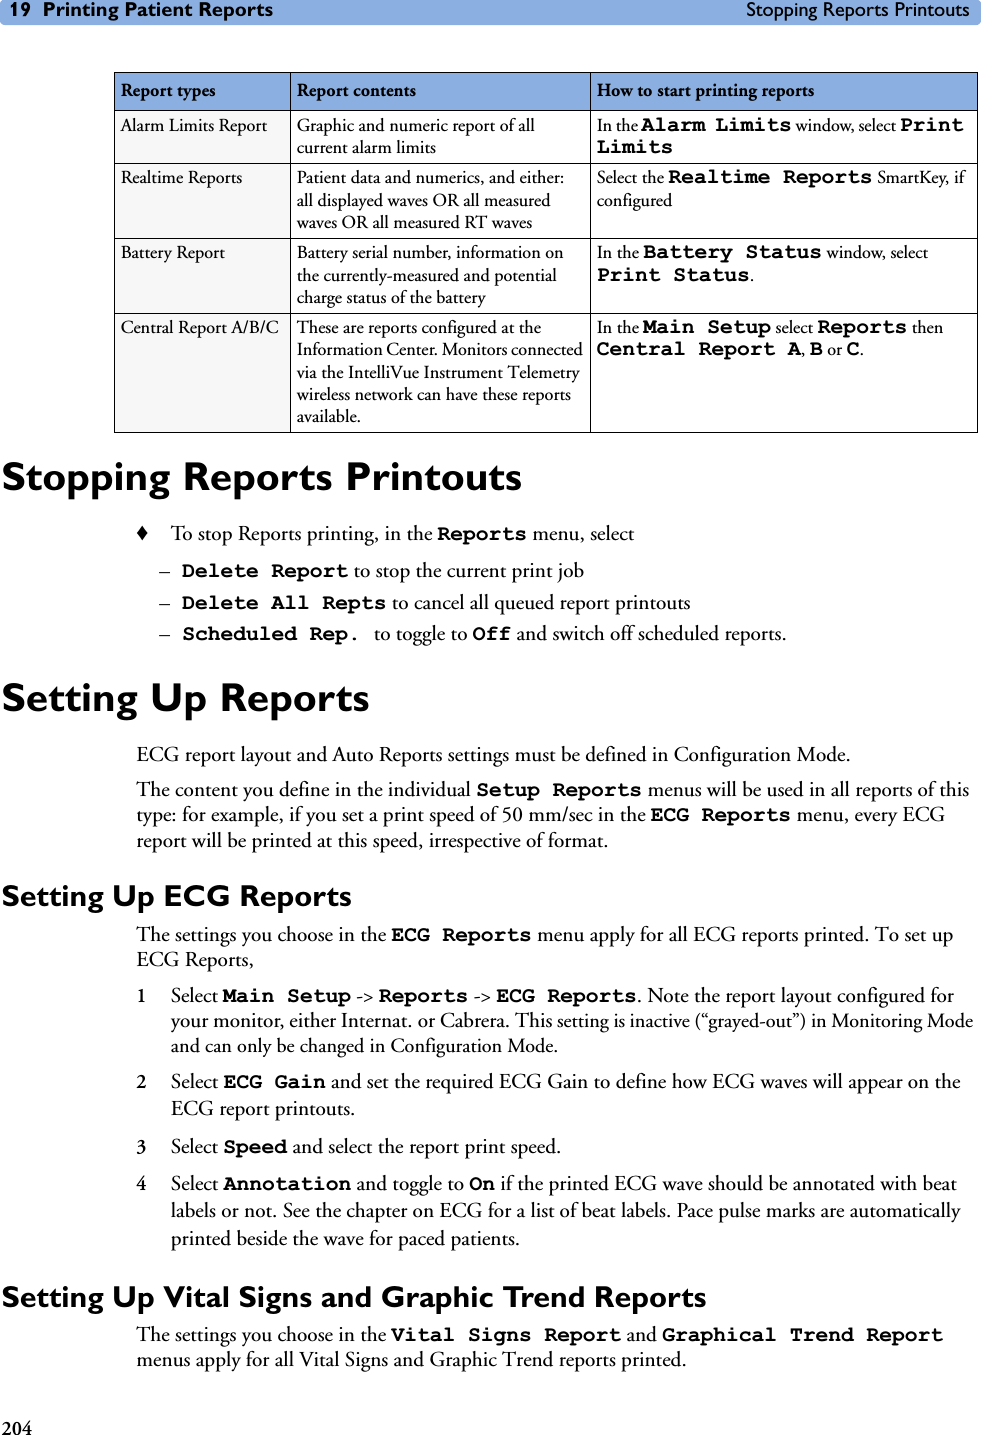 19 Printing Patient Reports Stopping Reports Printouts204Stopping Reports Printouts♦To stop Reports printing, in the Reports menu, select –Delete Report to stop the current print job –Delete All Repts to cancel all queued report printouts–Scheduled Rep. to toggle to Off and switch off scheduled reports.Setting Up ReportsECG report layout and Auto Reports settings must be defined in Configuration Mode. The content you define in the individual Setup Reports menus will be used in all reports of this type: for example, if you set a print speed of 50 mm/sec in the ECG Reports menu, every ECG report will be printed at this speed, irrespective of format.Setting Up ECG ReportsThe settings you choose in the ECG Reports menu apply for all ECG reports printed. To set up ECG Reports, 1Select Main Setup -&gt; Reports -&gt; ECG Reports. Note the report layout configured for your monitor, either Internat. or Cabrera. This setting is inactive (“grayed-out”) in Monitoring Mode and can only be changed in Configuration Mode. 2Select ECG Gain and set the required ECG Gain to define how ECG waves will appear on the ECG report printouts. 3Select Speed and select the report print speed.4Select Annotation and toggle to On if the printed ECG wave should be annotated with beat labels or not. See the chapter on ECG for a list of beat labels. Pace pulse marks are automatically printed beside the wave for paced patients.Setting Up Vital Signs and Graphic Trend Reports The settings you choose in the Vital Signs Report and Graphical Trend Report menus apply for all Vital Signs and Graphic Trend reports printed.Alarm Limits Report Graphic and numeric report of all current alarm limitsIn the Alarm Limits window, select Print LimitsRealtime Reports Patient data and numerics, and either: all displayed waves OR all measured waves OR all measured RT wavesSelect the Realtime Reports SmartKey, if configuredBattery Report Battery serial number, information on the currently-measured and potential charge status of the batteryIn the Battery Status window, select Print Status.Central Report A/B/C These are reports configured at the Information Center. Monitors connected via the IntelliVue Instrument Telemetry wireless network can have these reports available.In the Main Setup select Reports then Central Report A, B or C.Report types Report contents How to start printing reports